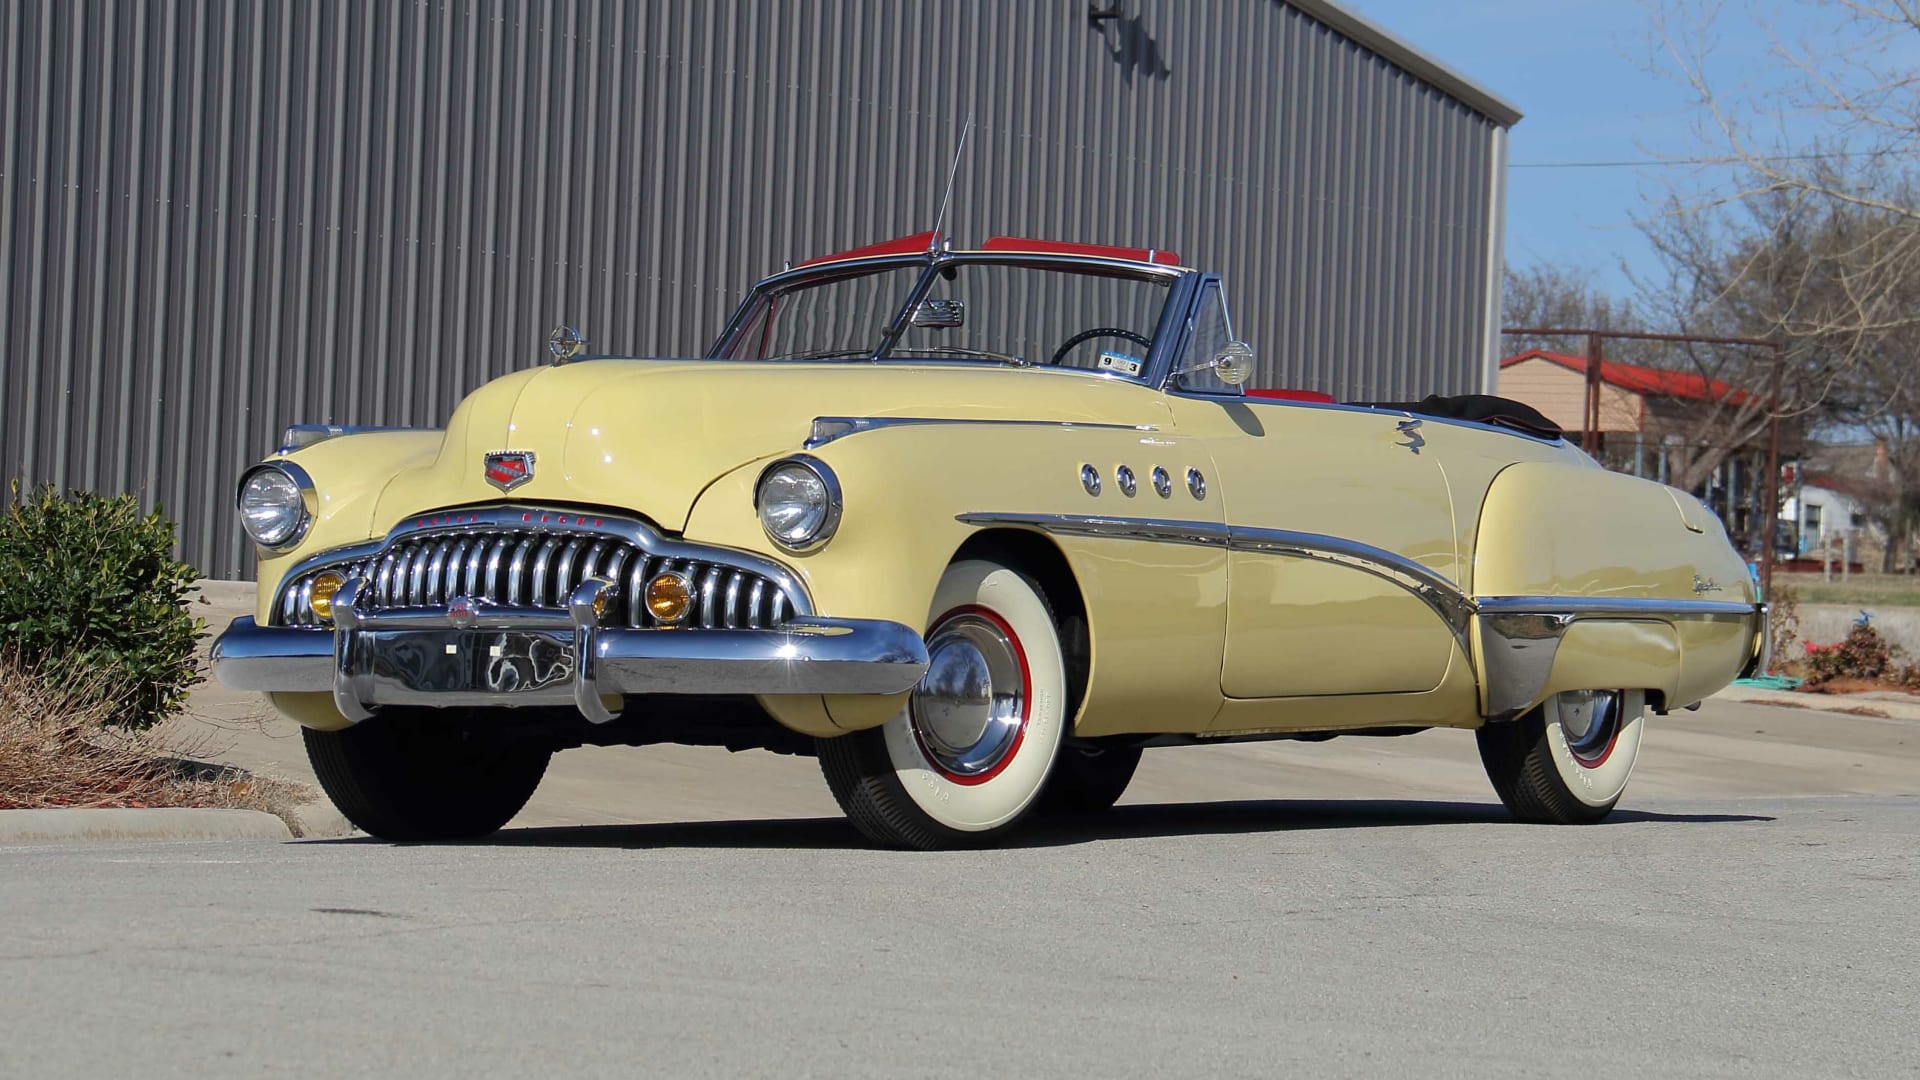 The spectacular 1949 Buick Roadmaster Series 70 Convertible featured